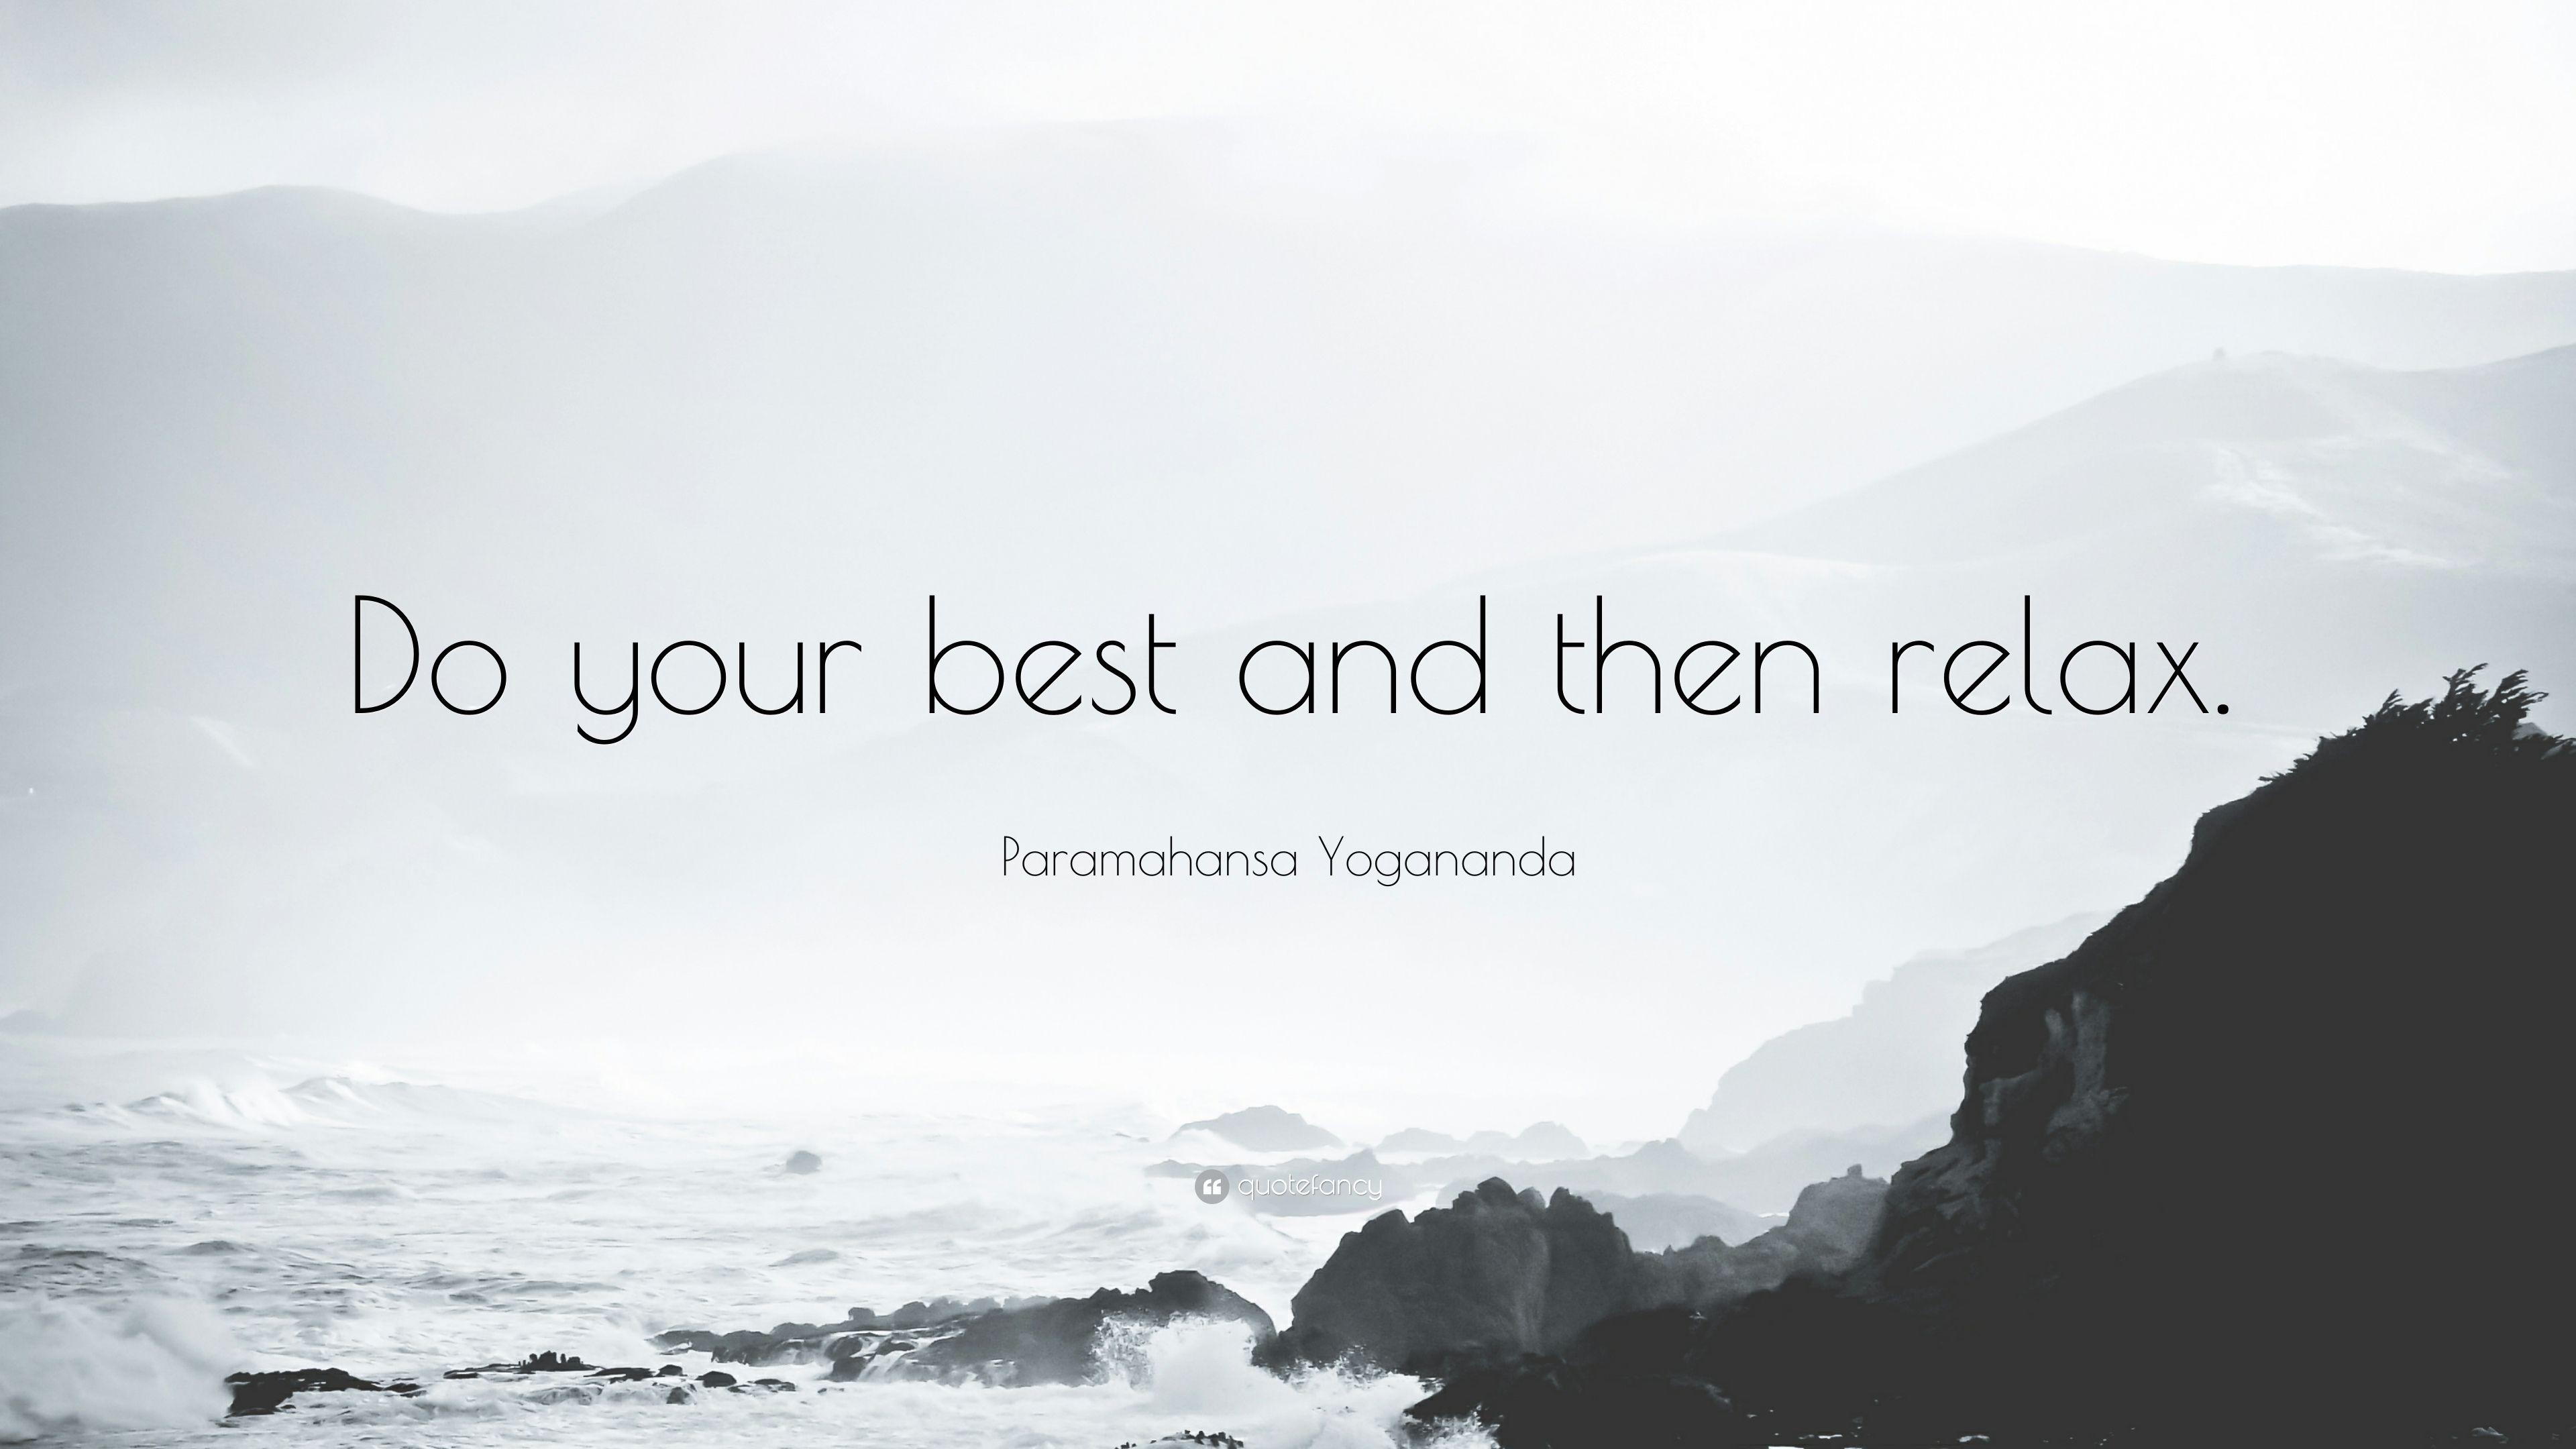 Paramahansa Yogananda Quote: “Do your best and then relax.” 12